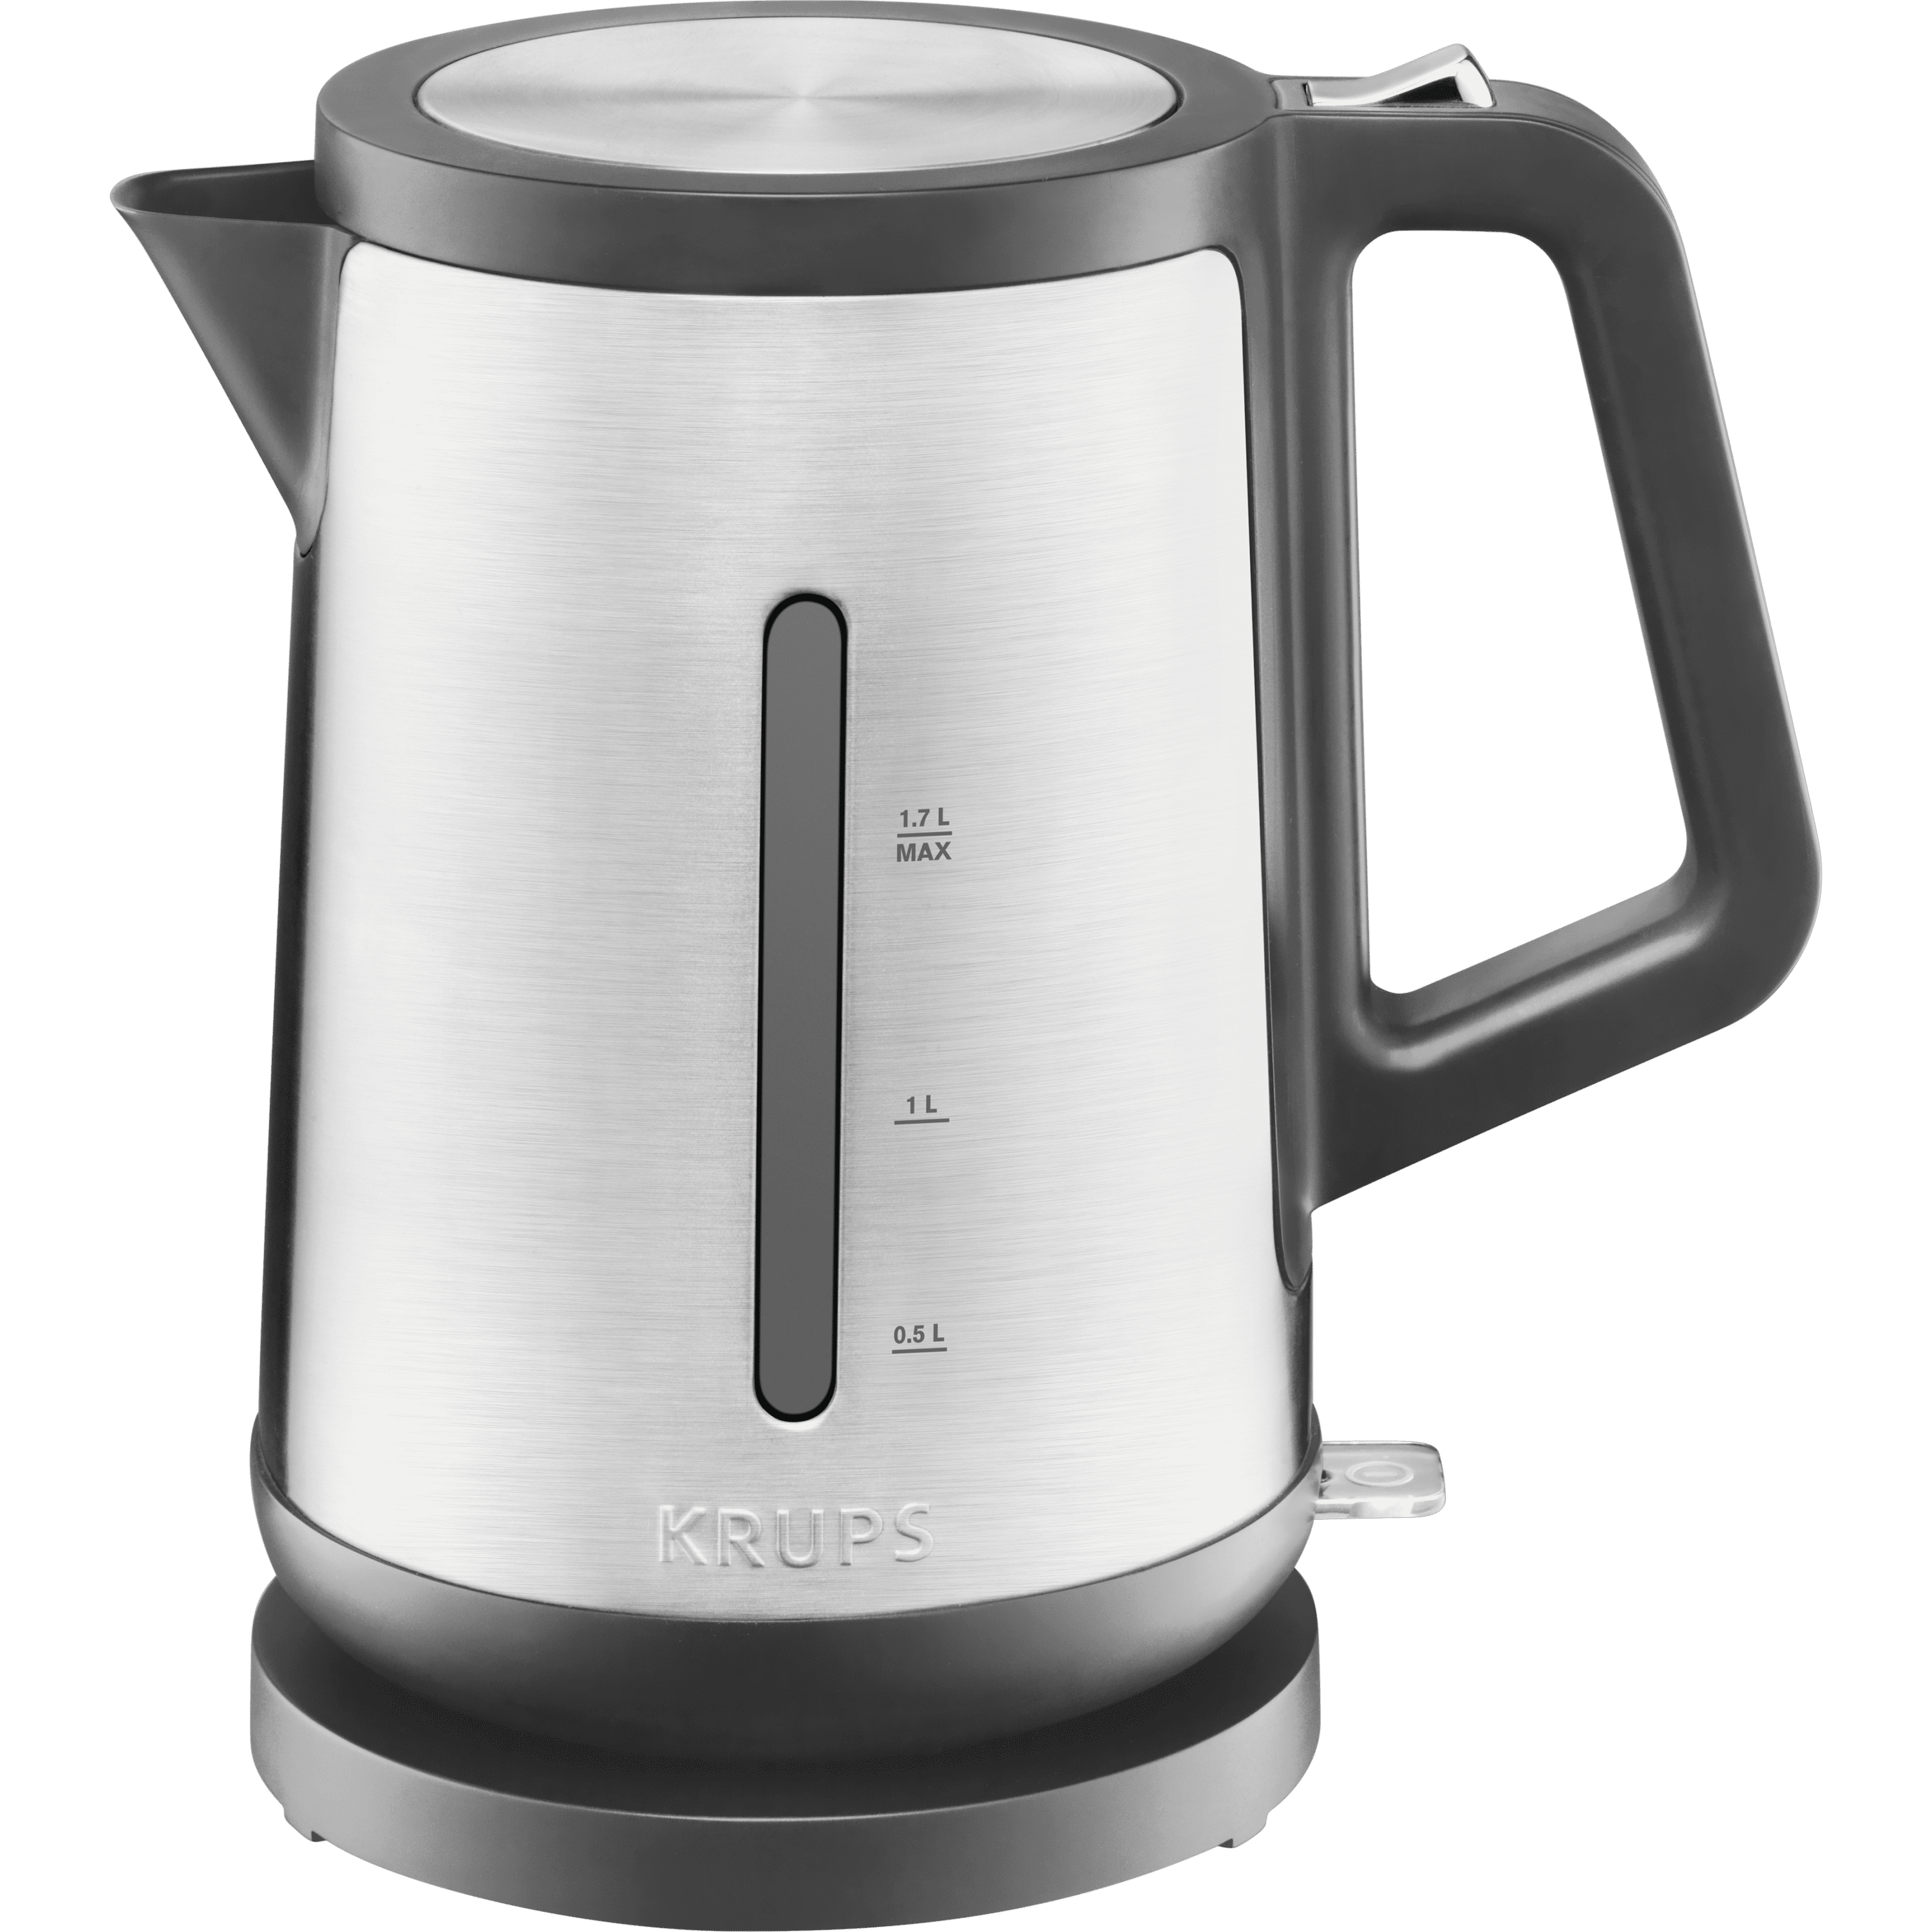 Krups Glass Electric Kettle 1.7 Liter LED Indicator, Anti Scale Filter, 1500 Watts Digital Control, Double Wall, Fast Boiling, Auto Off